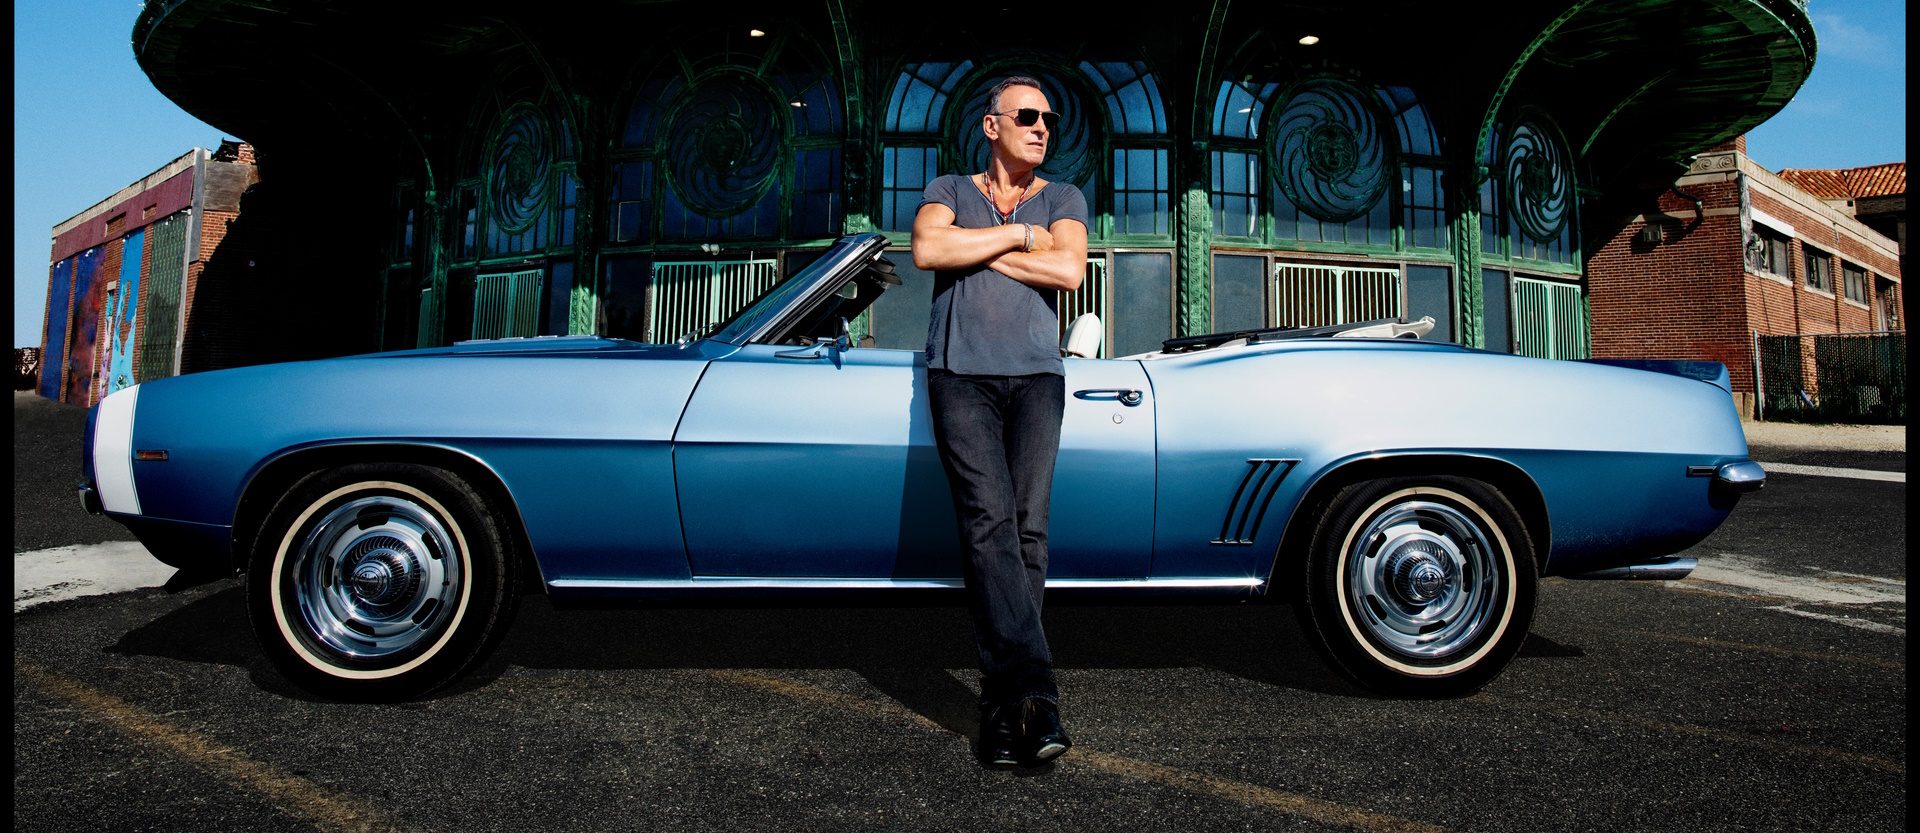 BRUCE_2023_color_Photo Danny Clinch